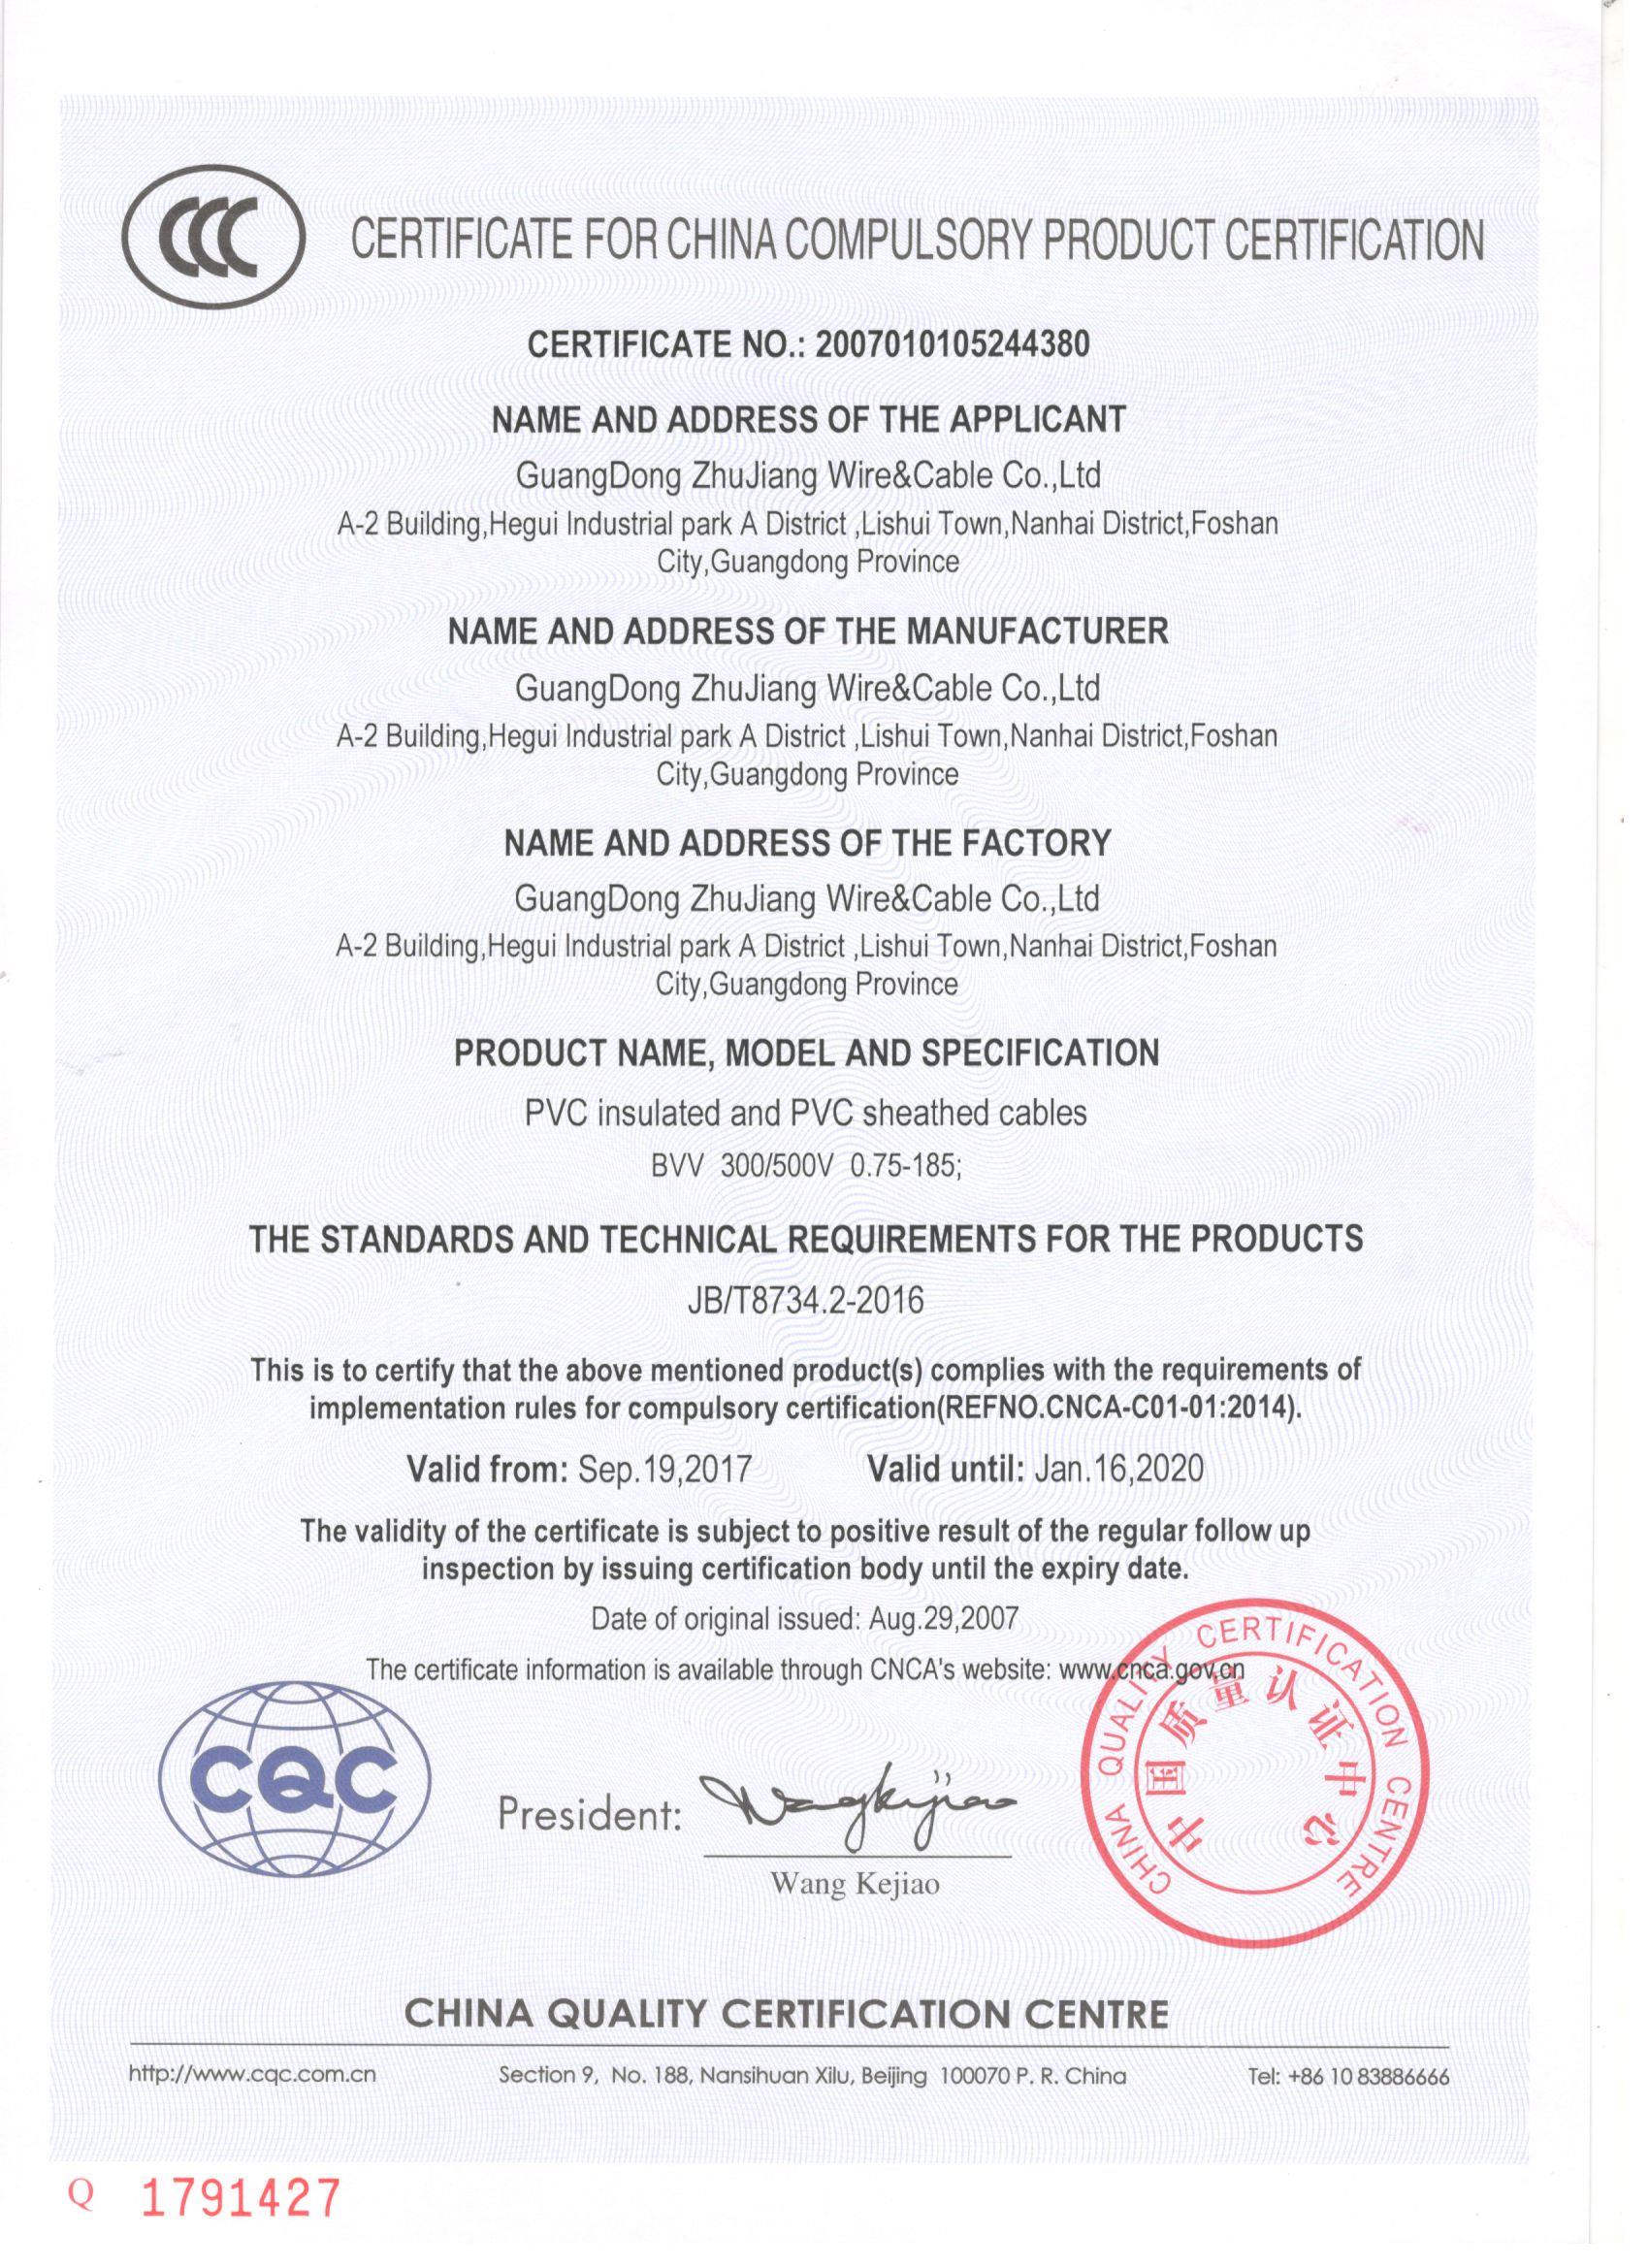 3C National Compulsory Product Certification (380-English)